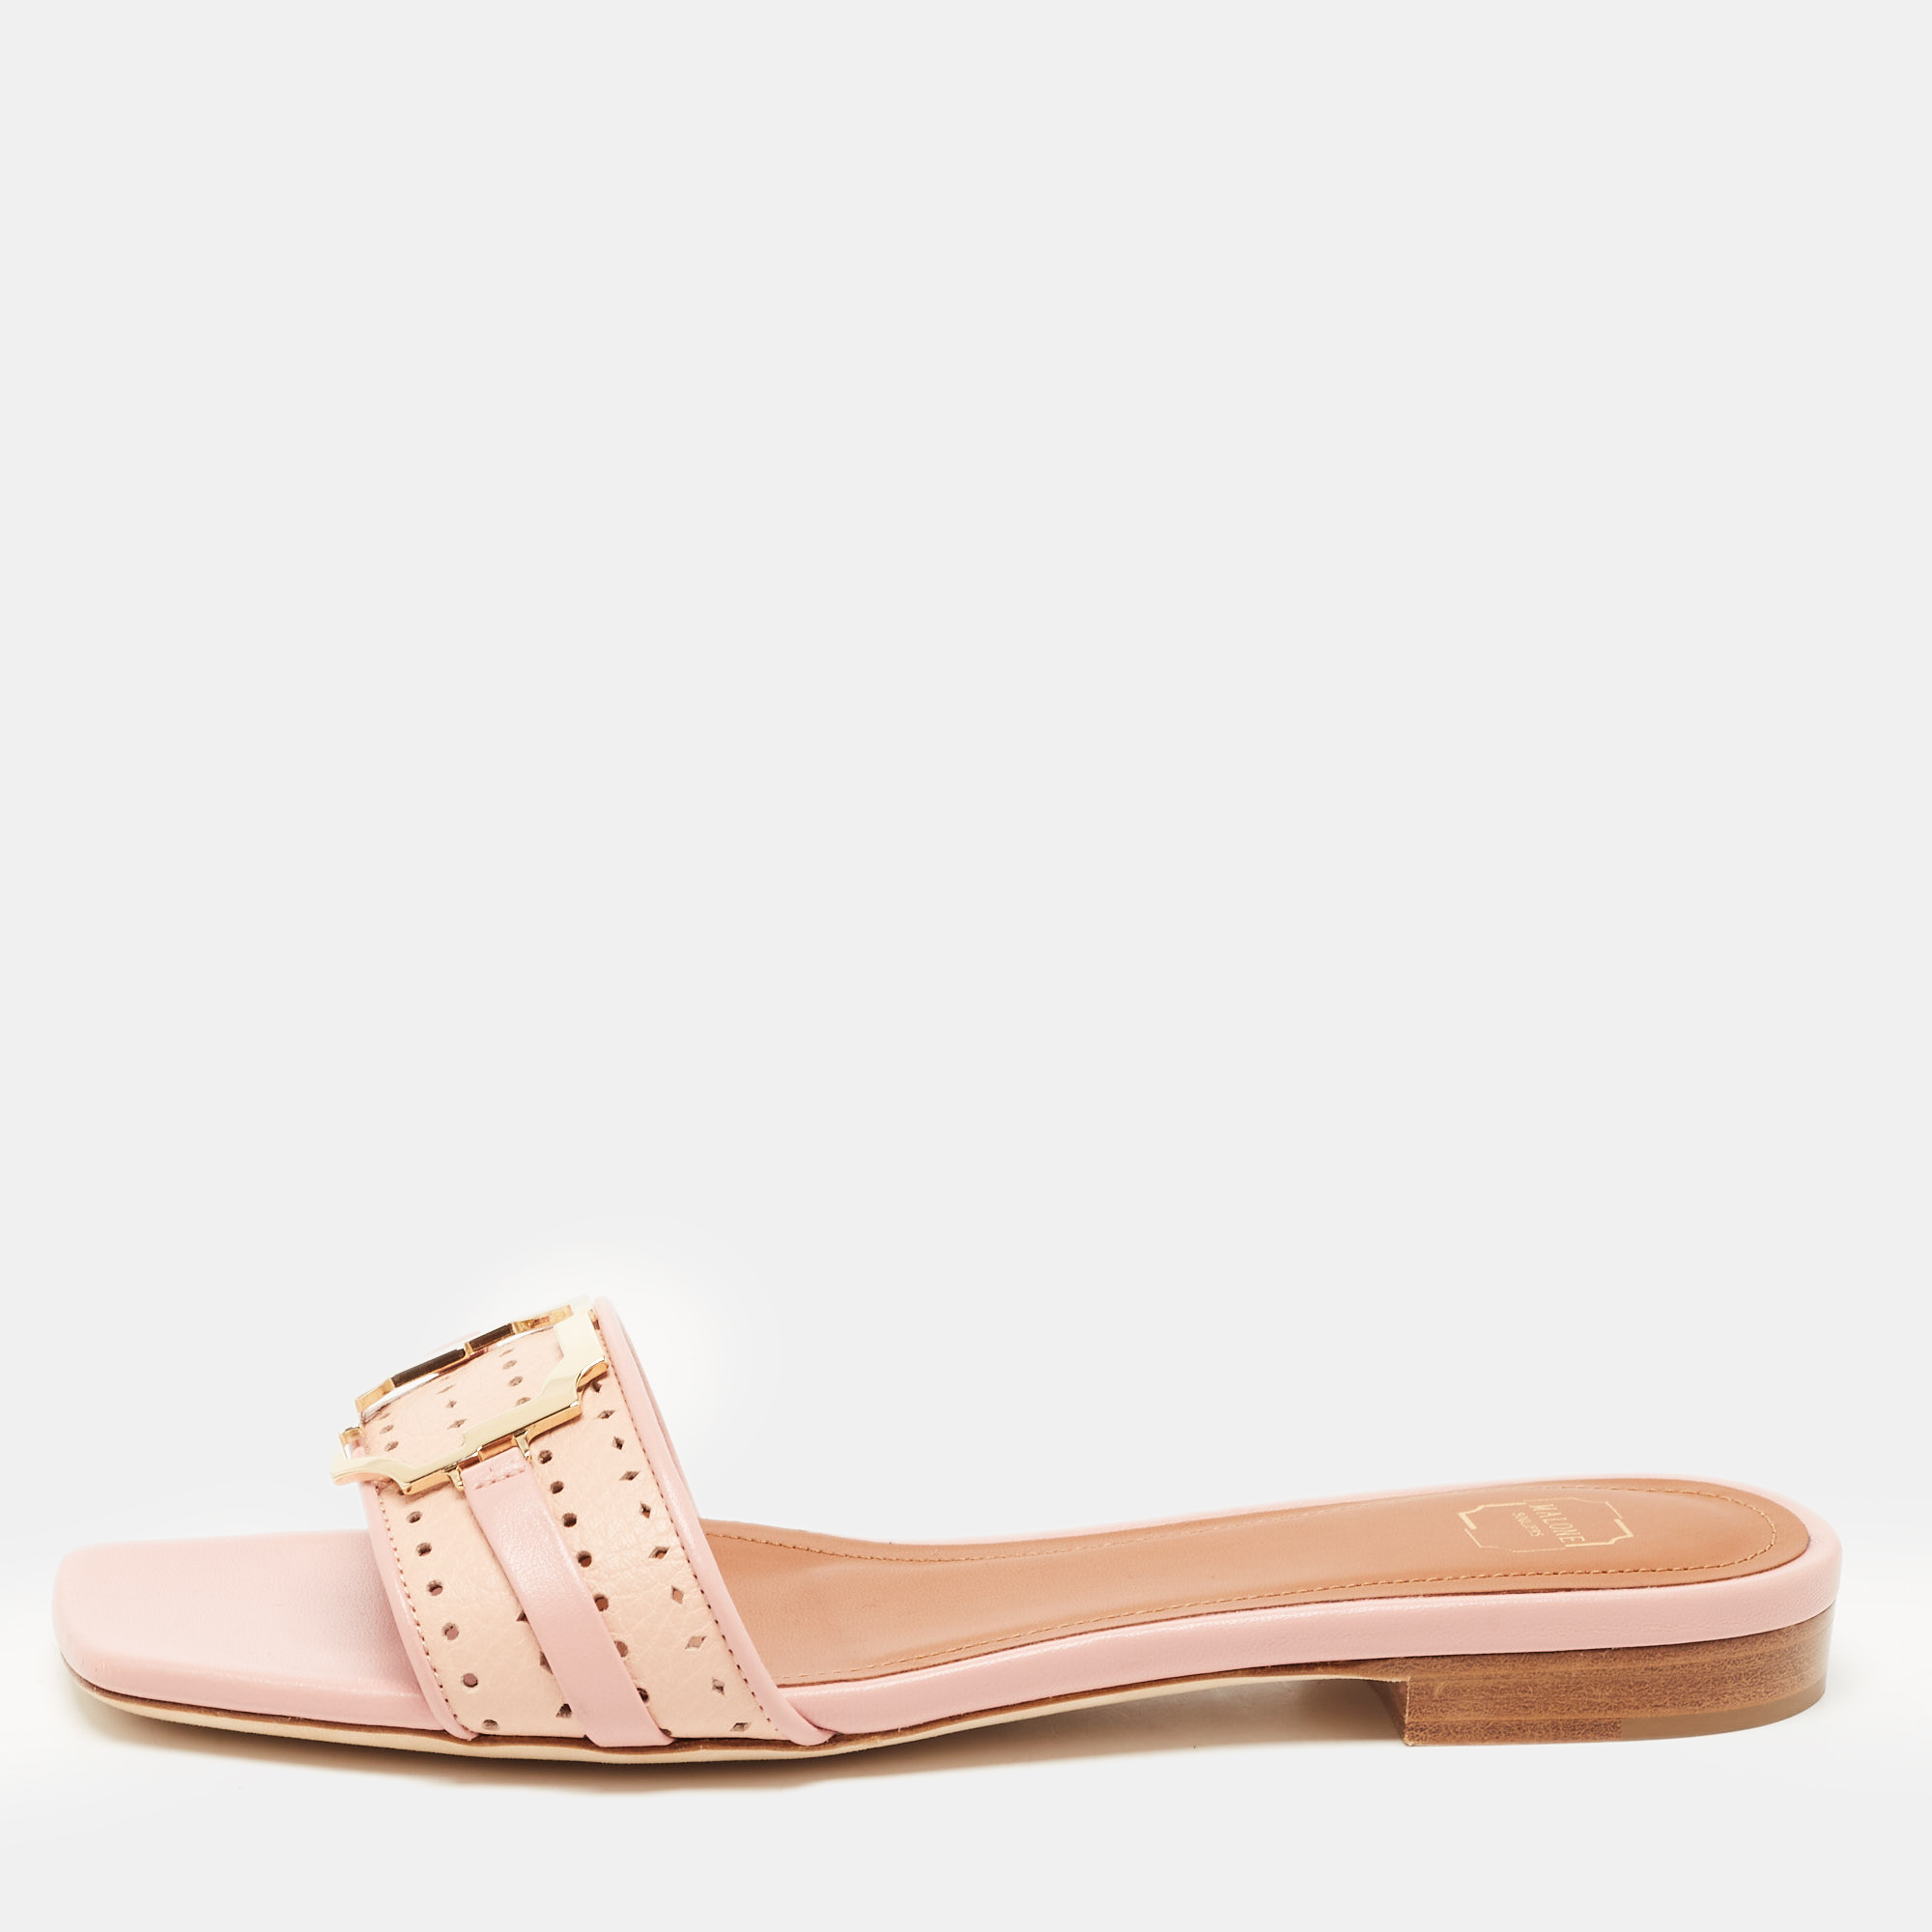 Malone Souliers Pink Perforated Leather Gena Flat Slides Size 36